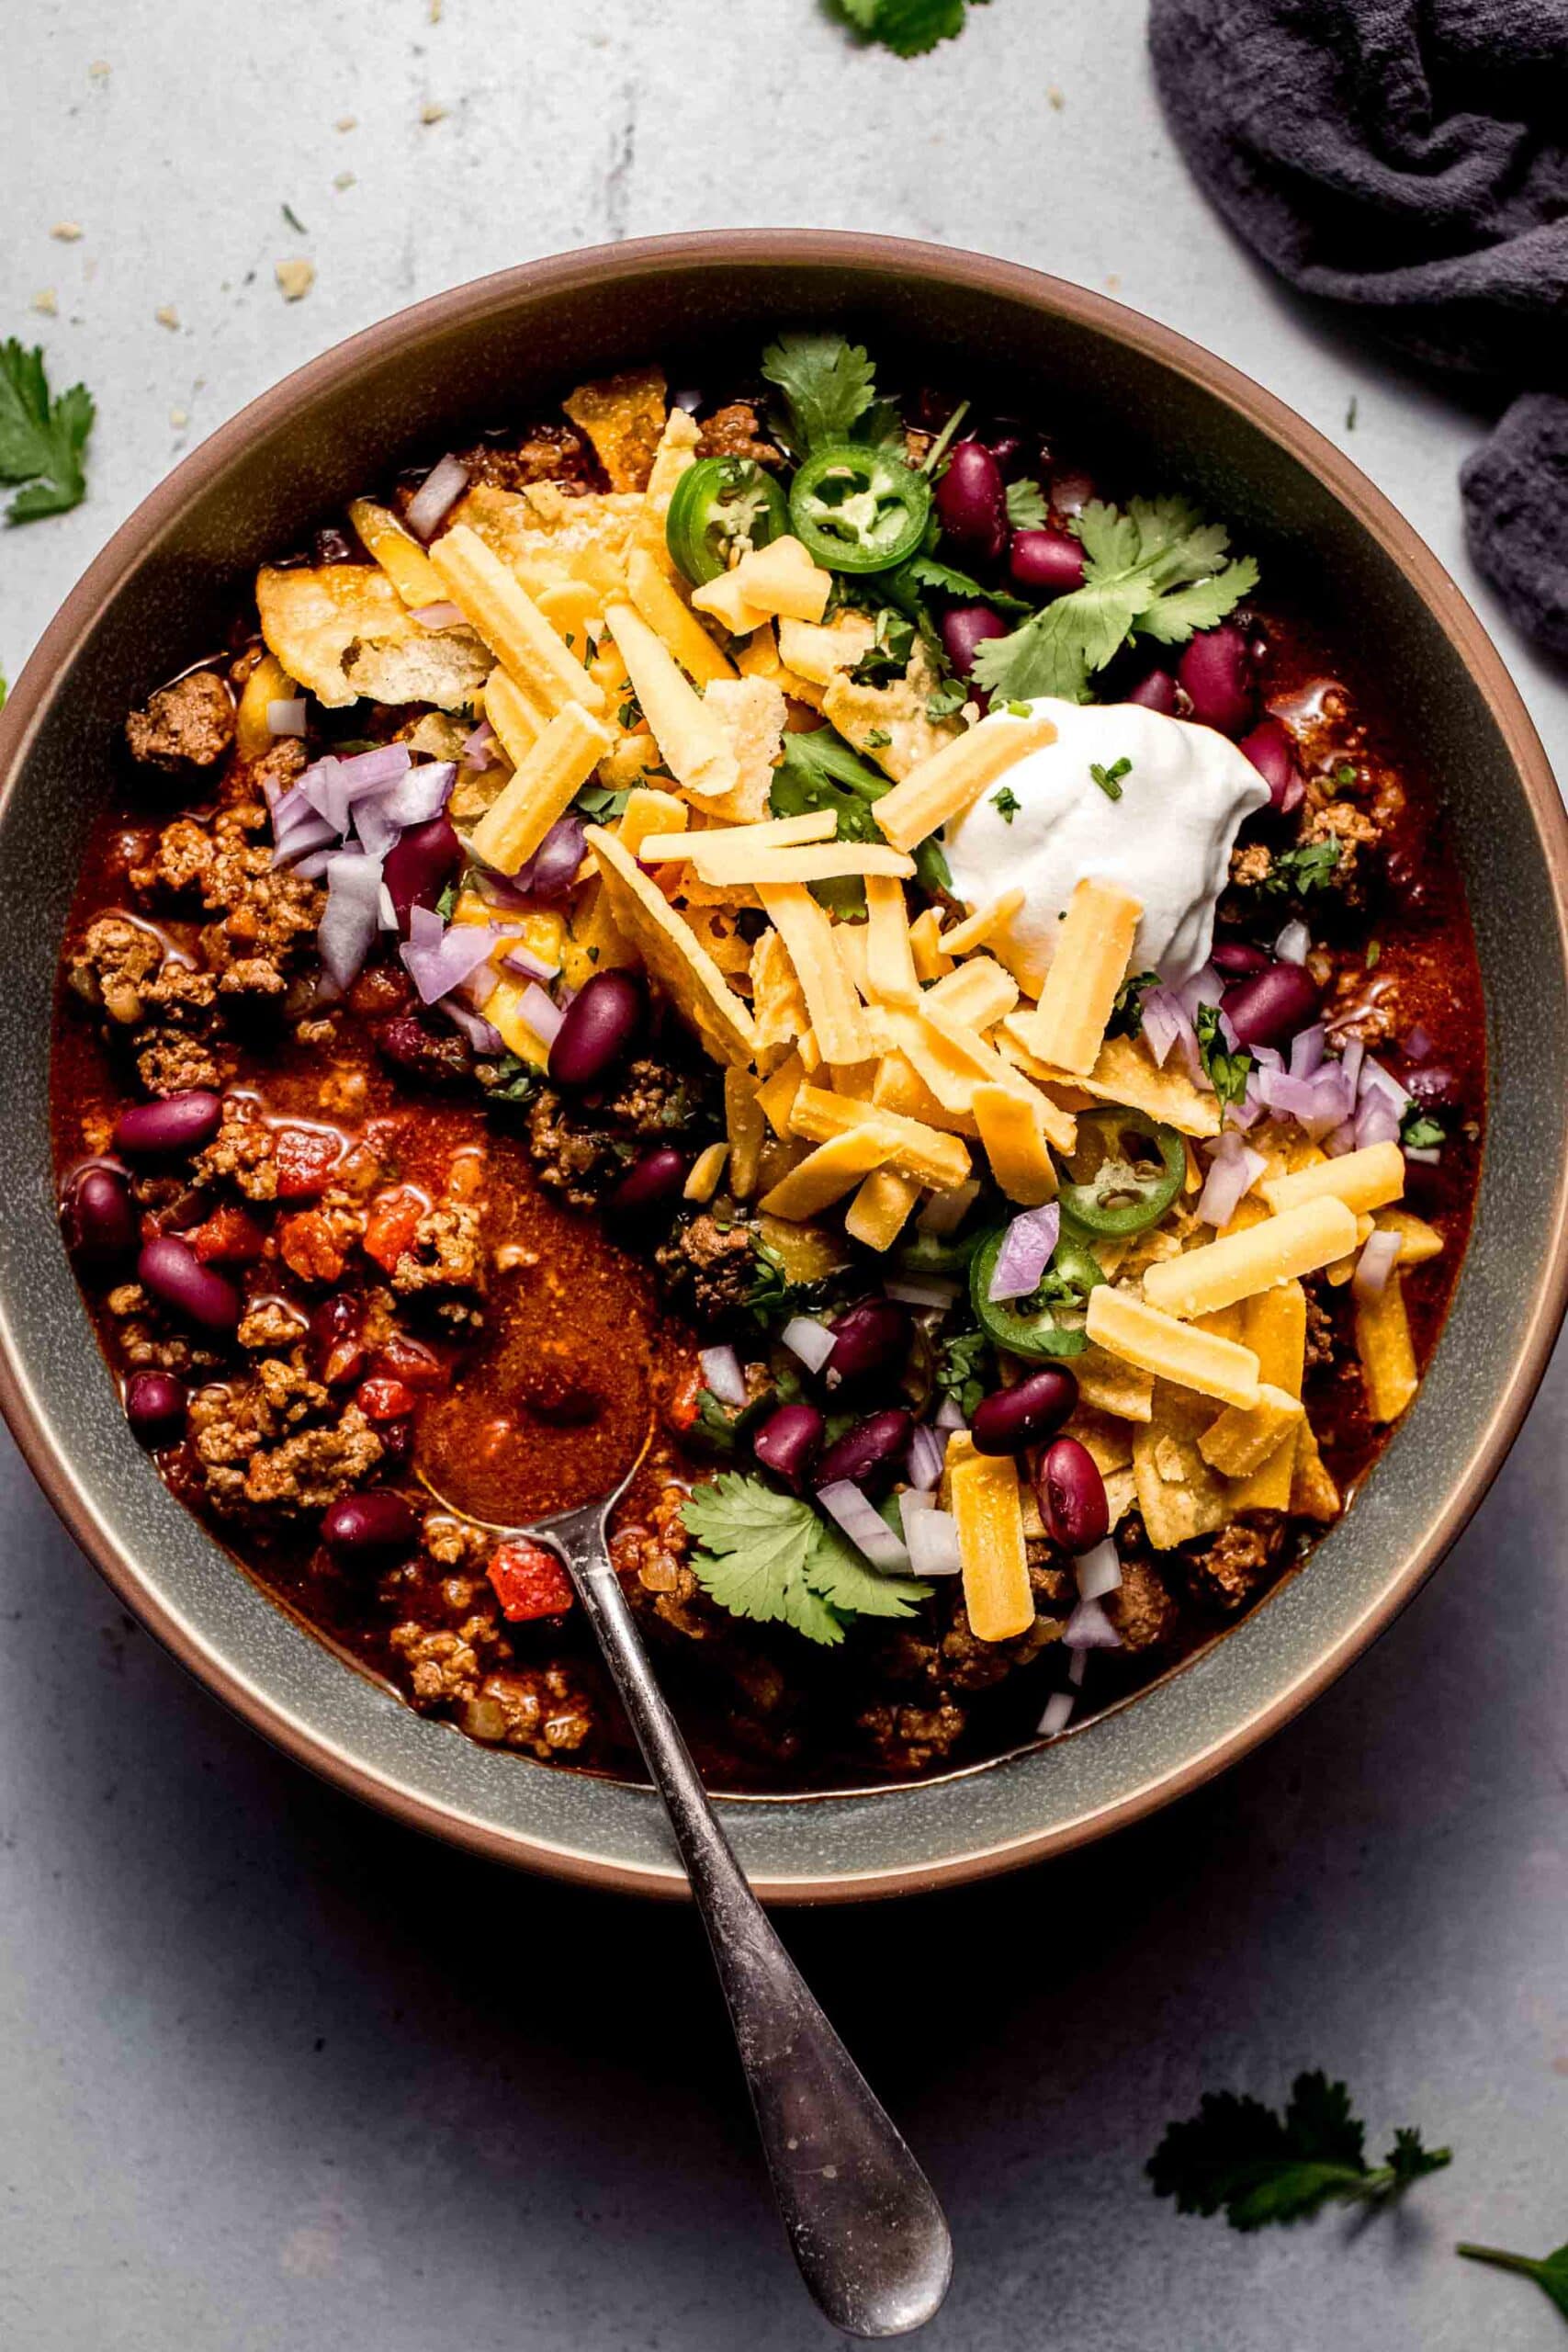 Instant pot chili in bowl with sour cream, cheese and onions.